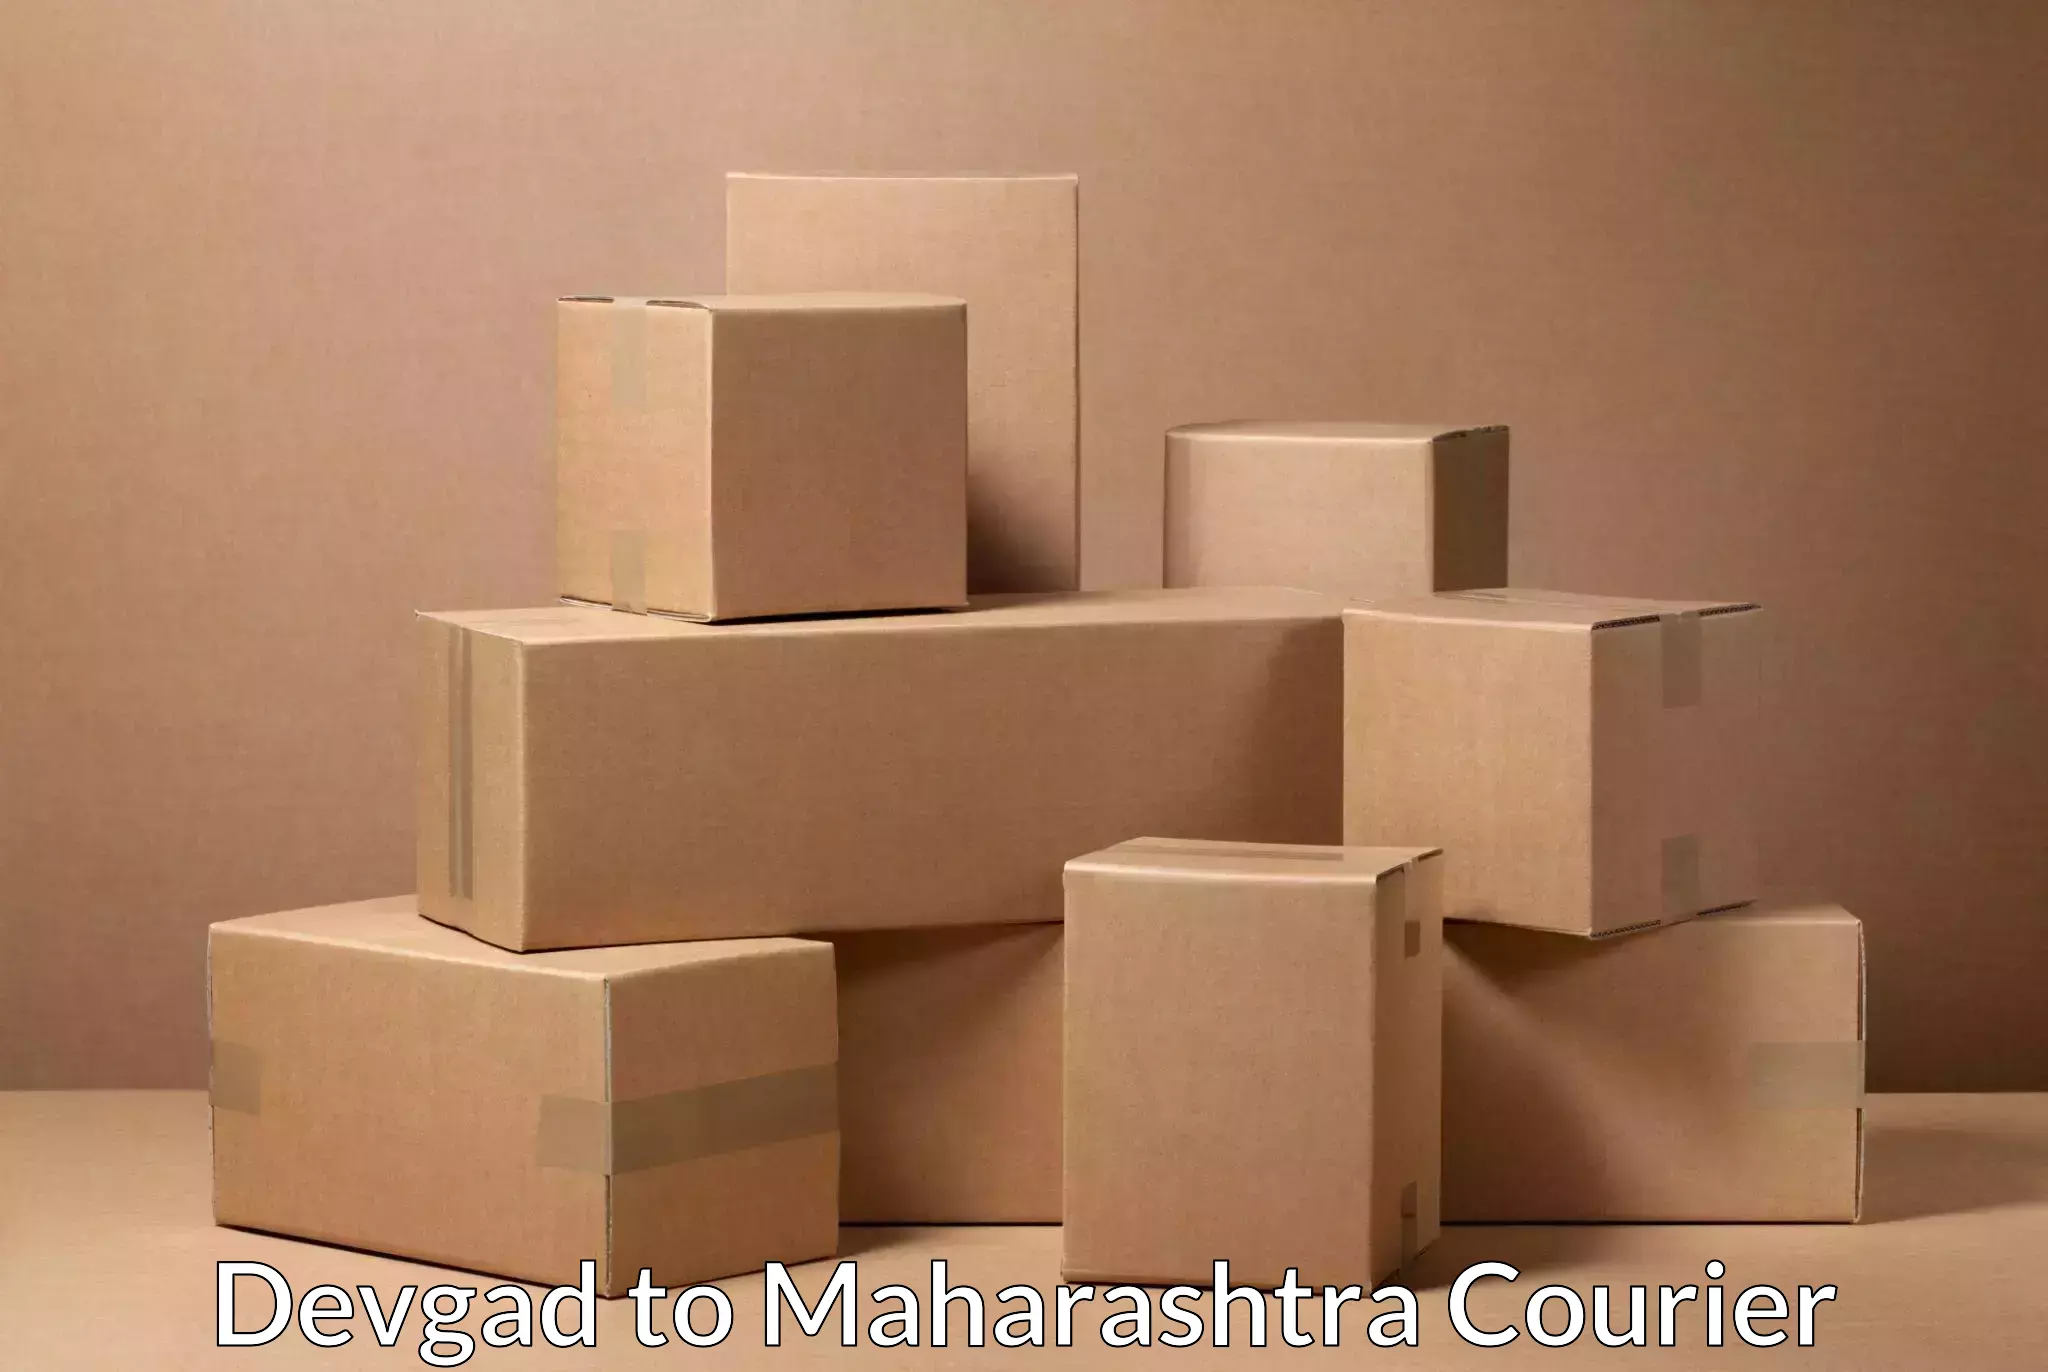 Residential courier service Devgad to Lonikand